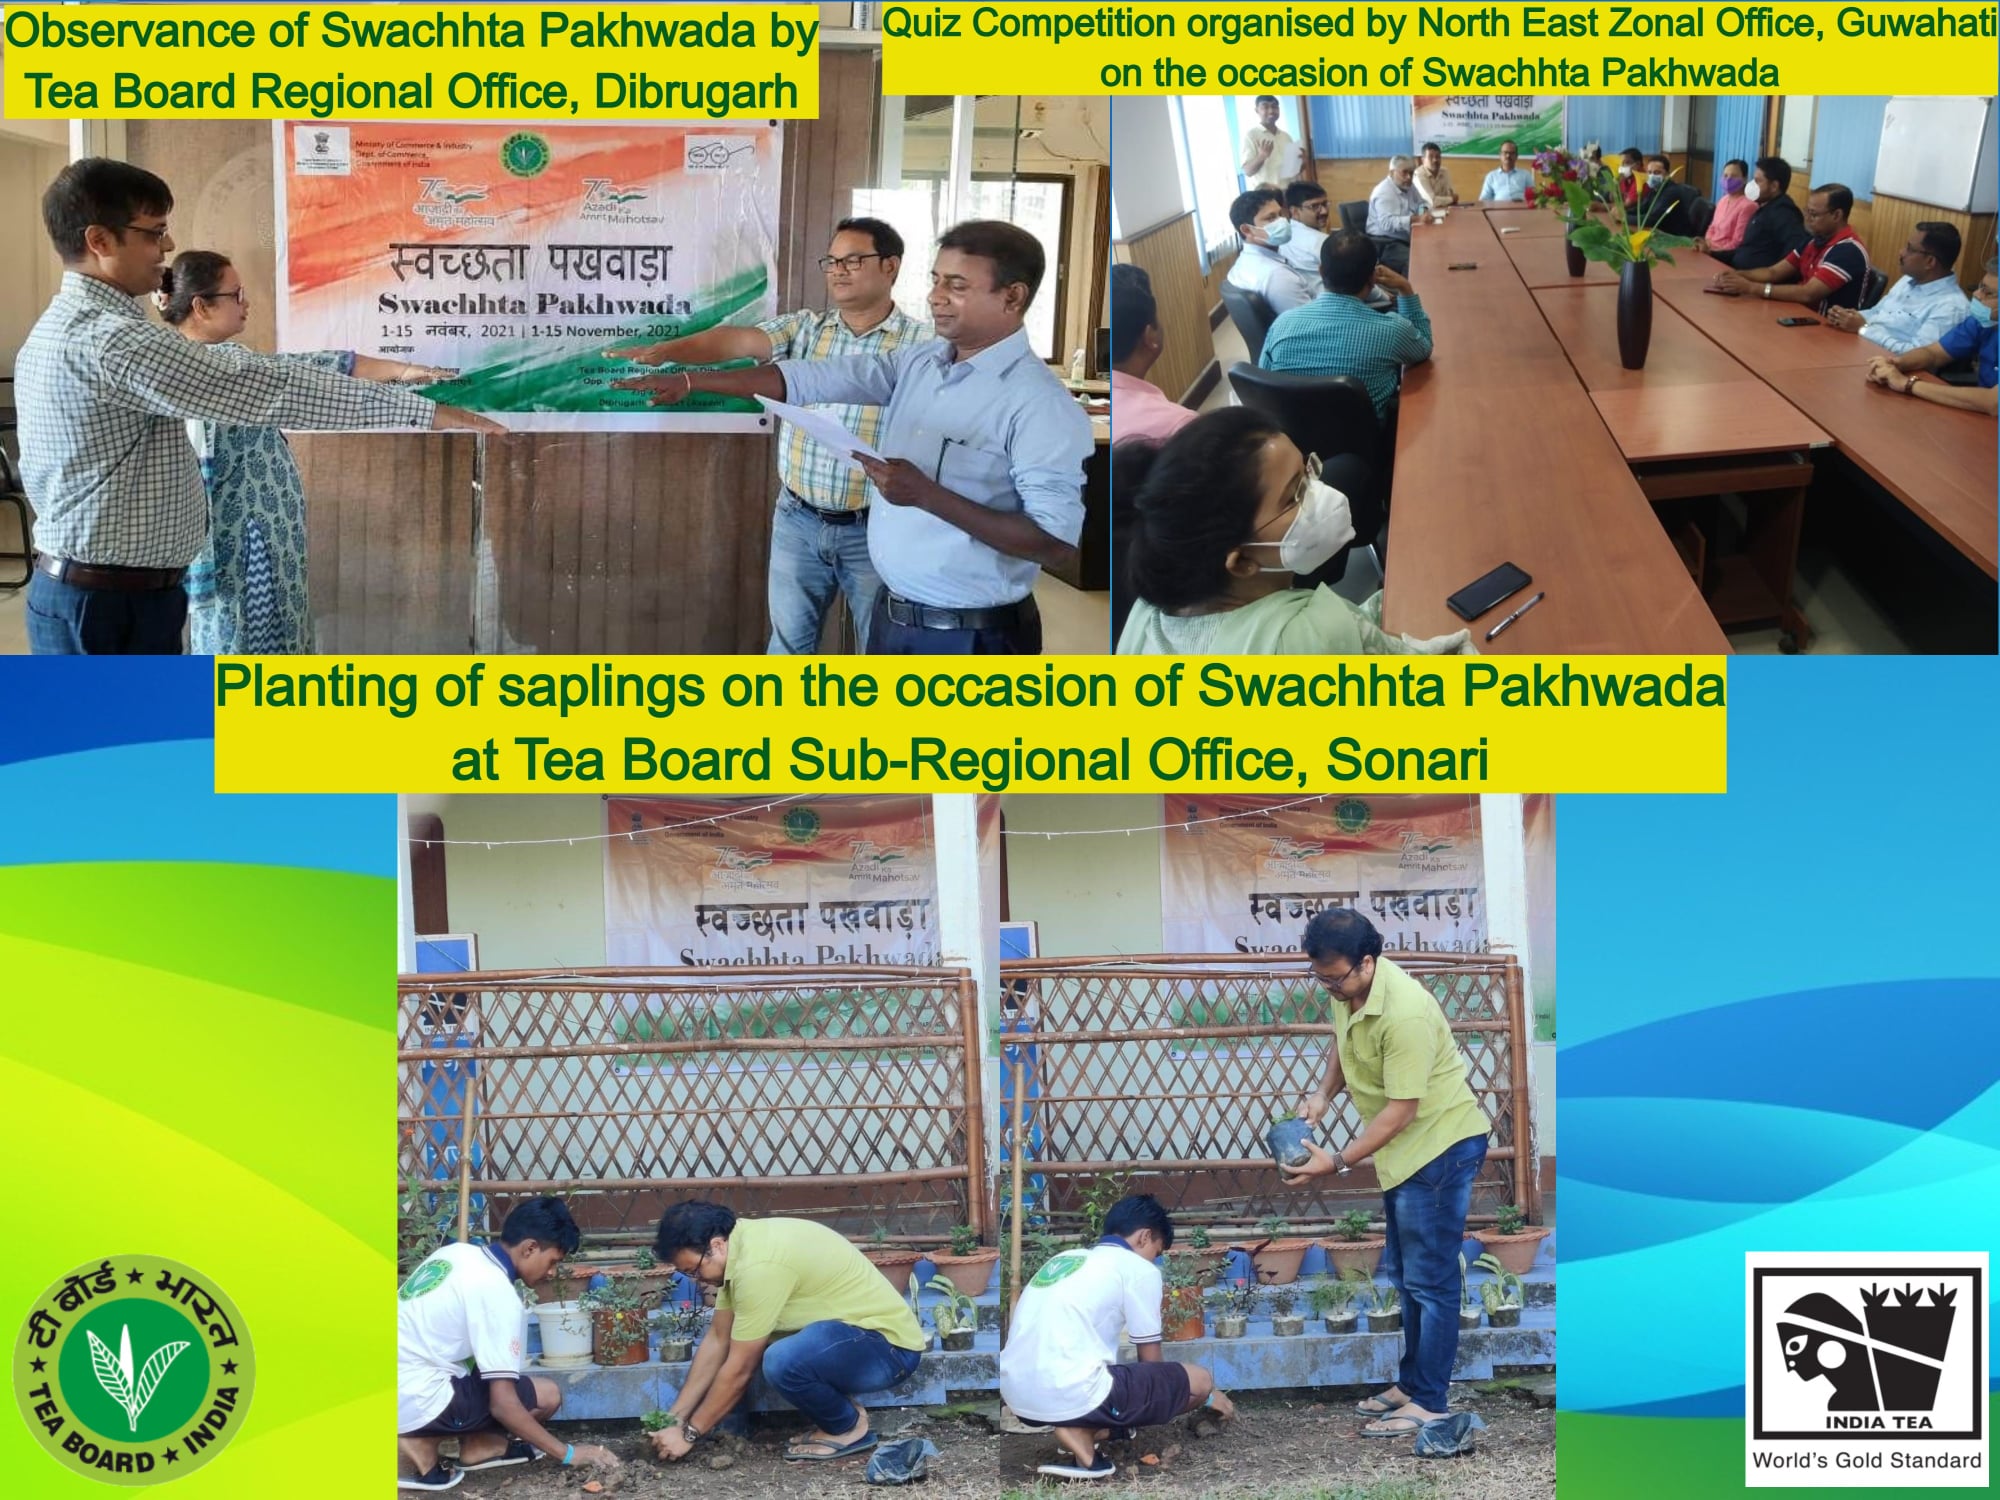 Observance of Swachhta Pakhwada by different Regional and Sub-Regional Offices of Tea Board, November 2021